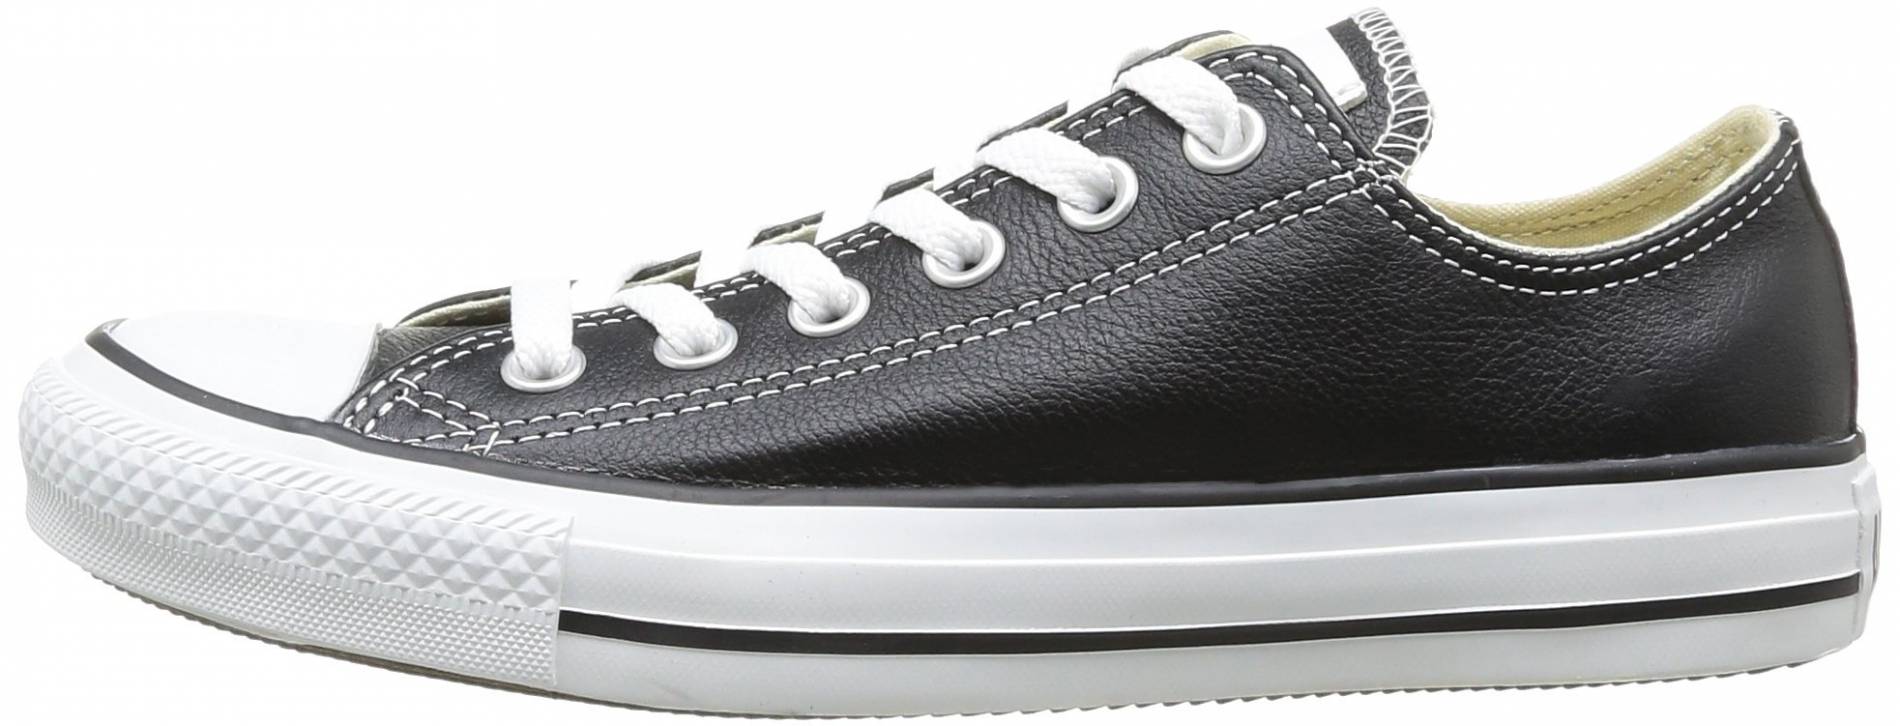 Save 39% on Converse Sneakers (90 